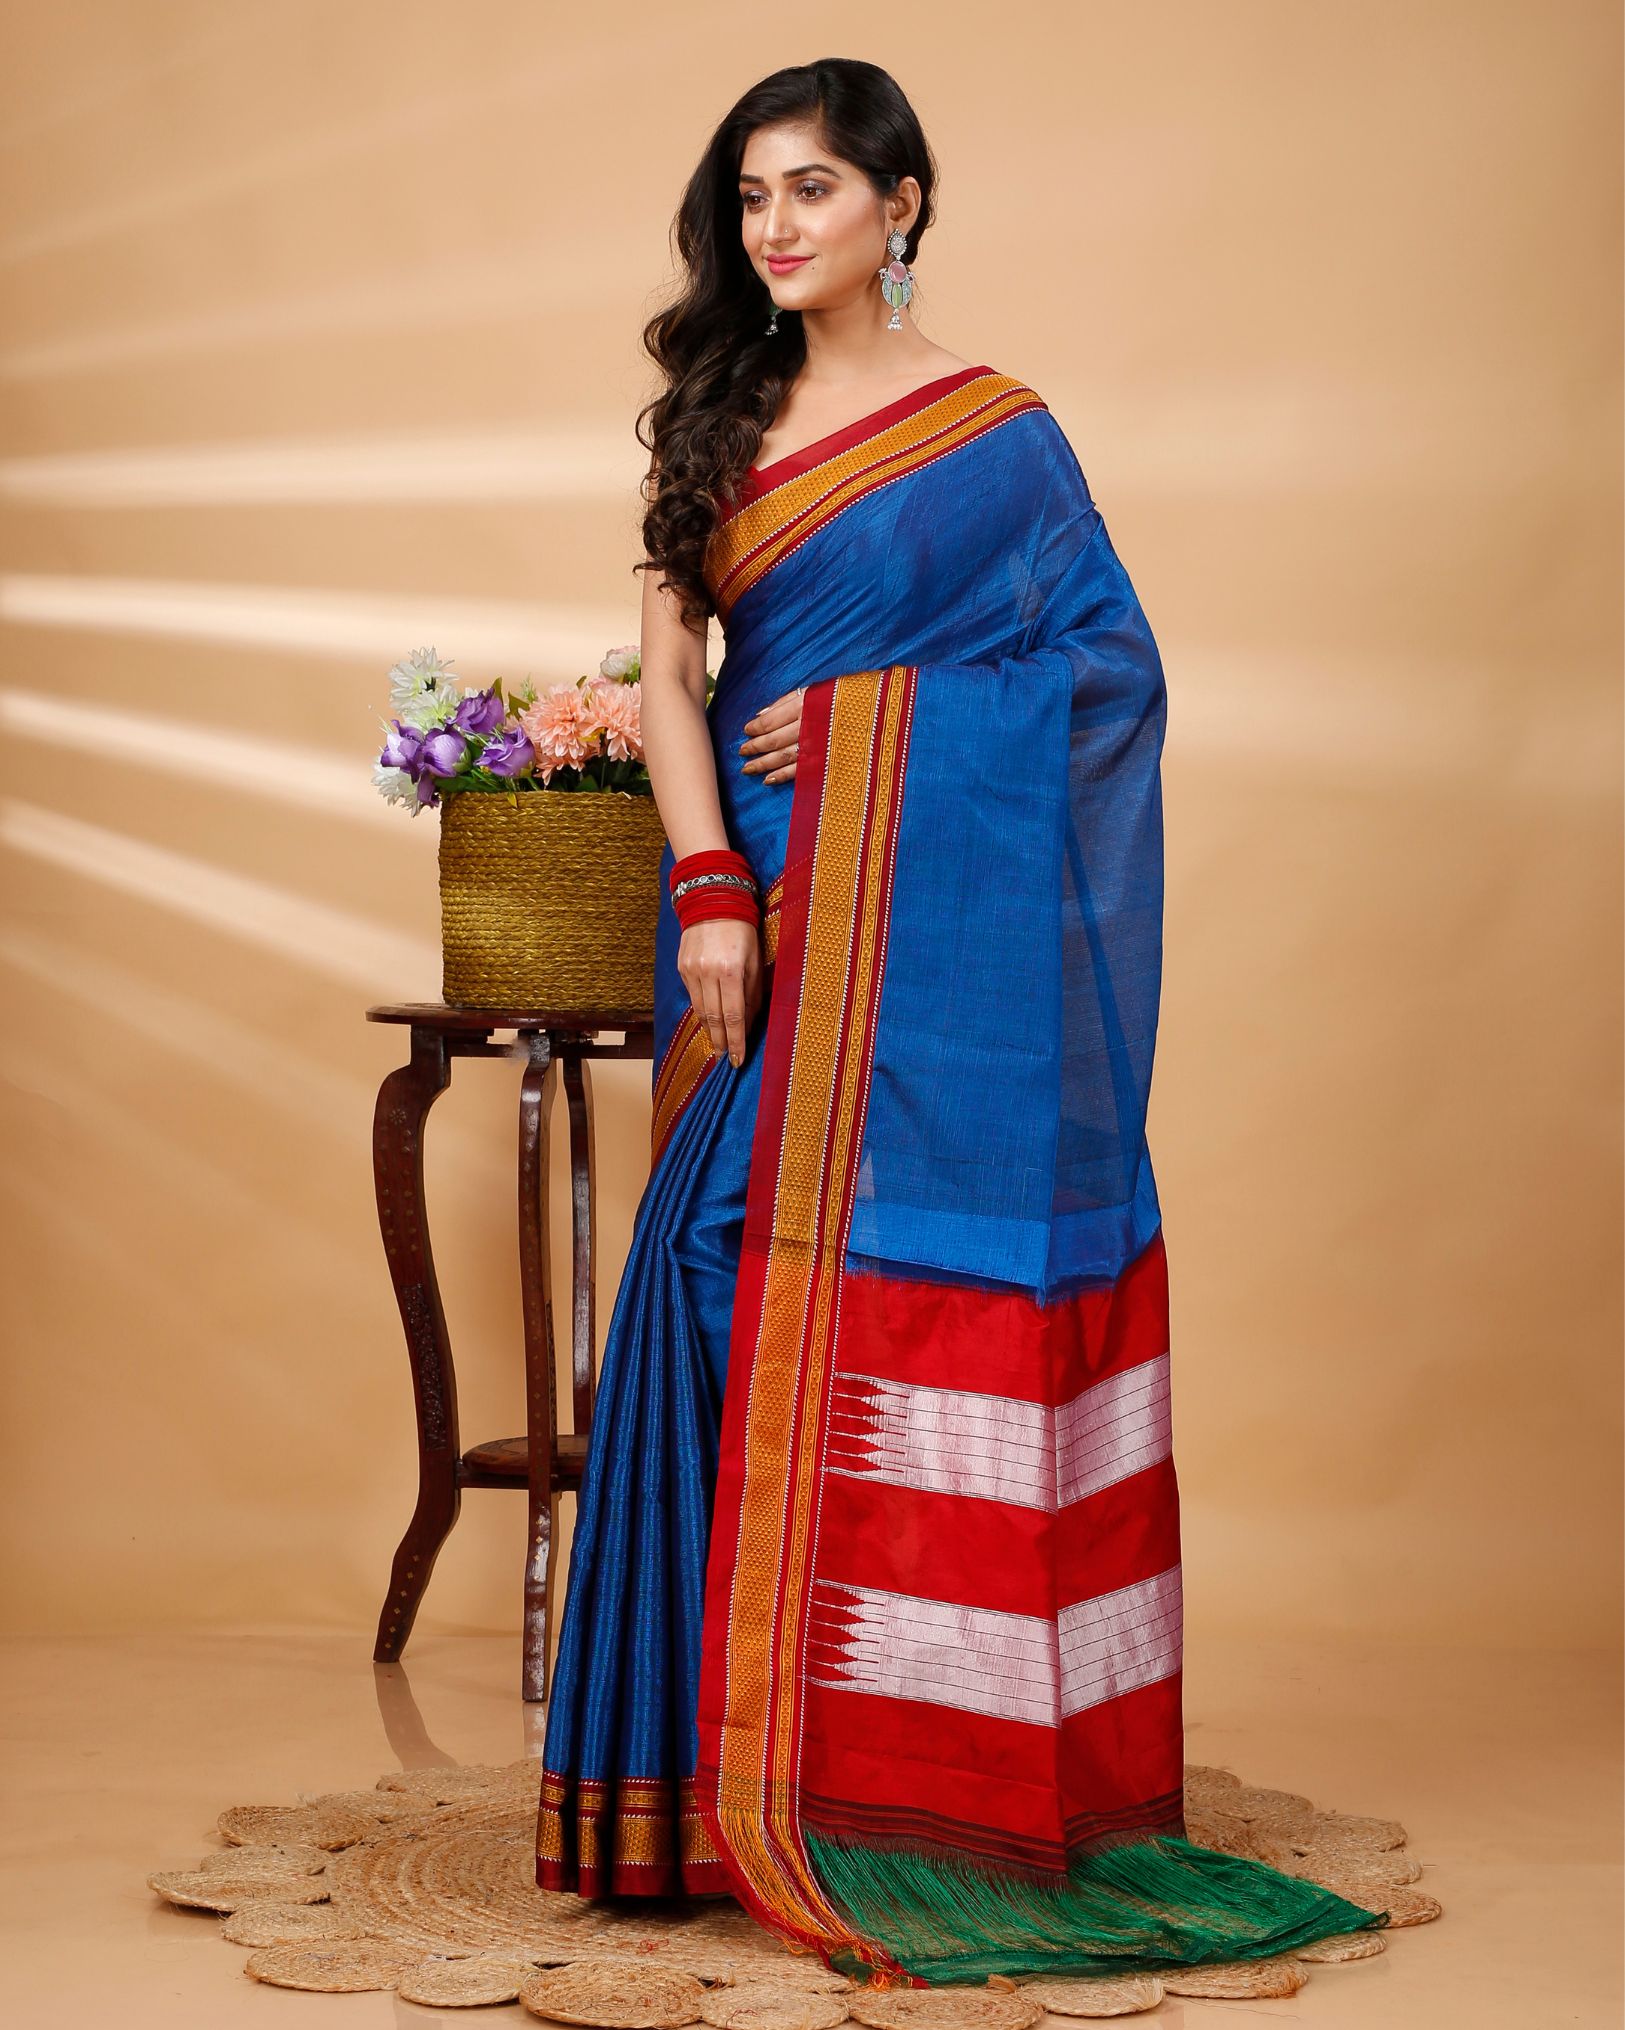 ILKAL Handloom Cotton Silk Saree Royal Blue Color with running blouse - IndieHaat